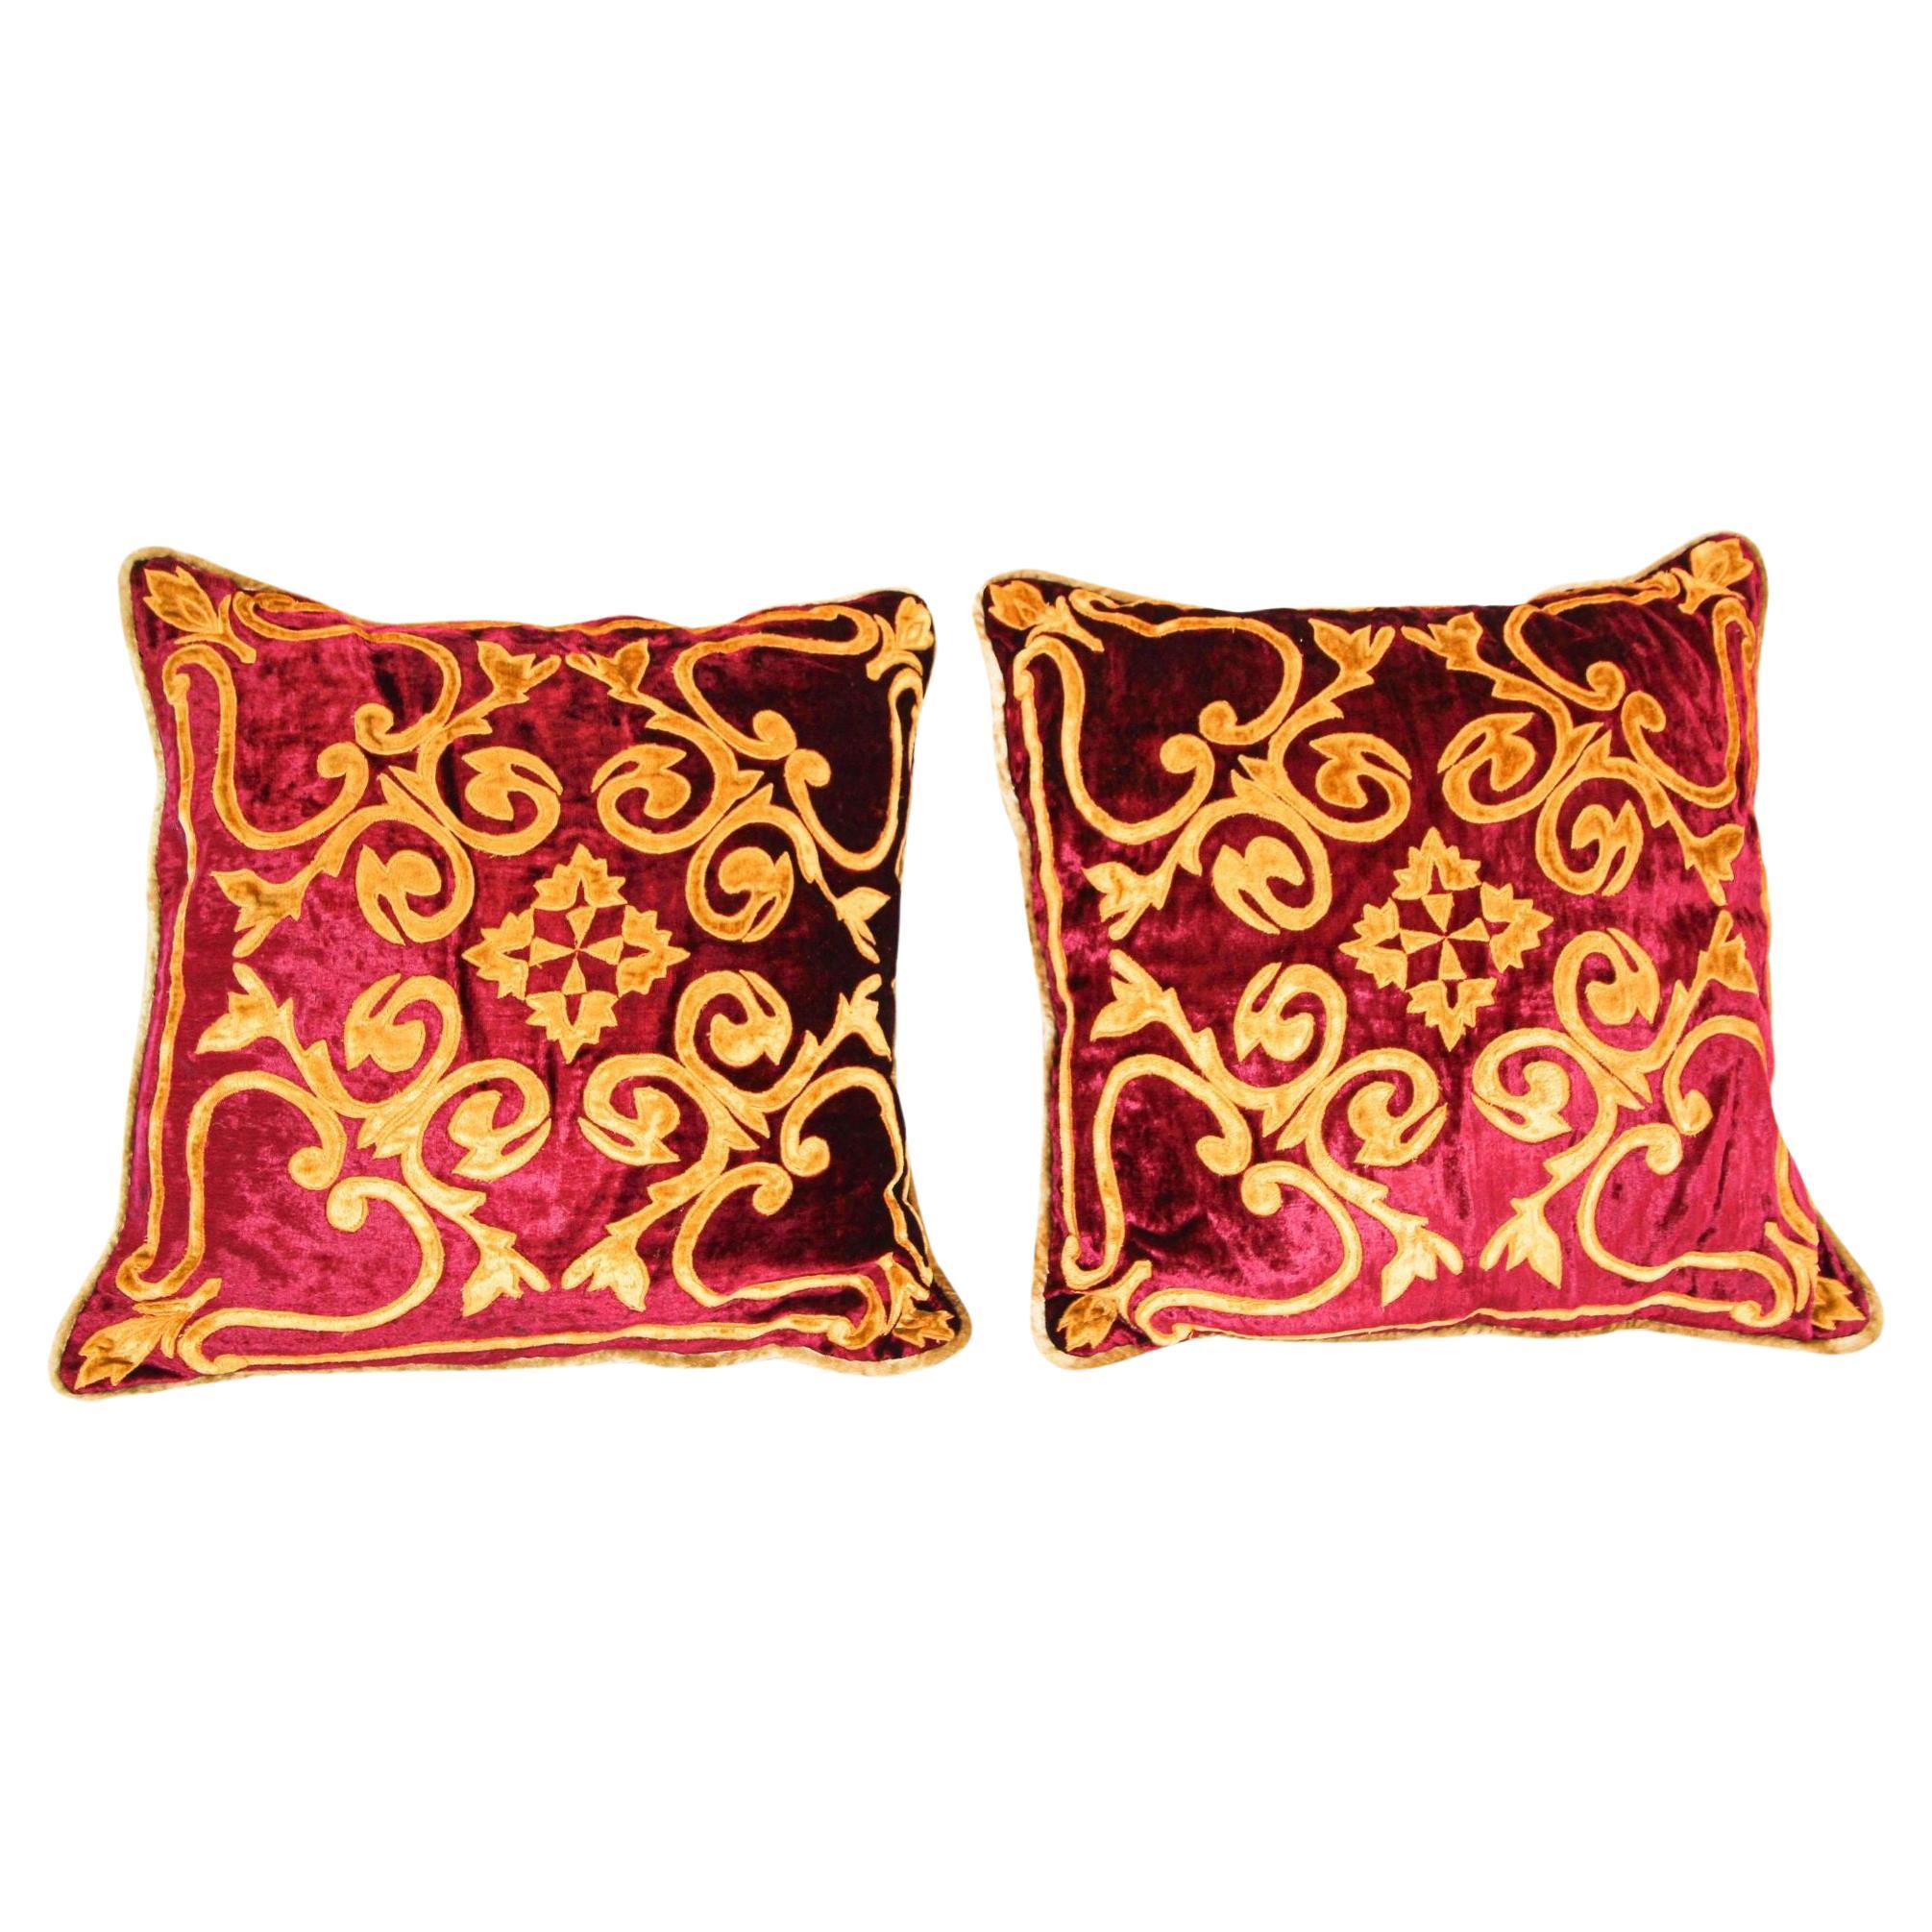 Venetian Baroque Red and Gold Velvet Pillows with Elaborate Applique Work a Pair For Sale